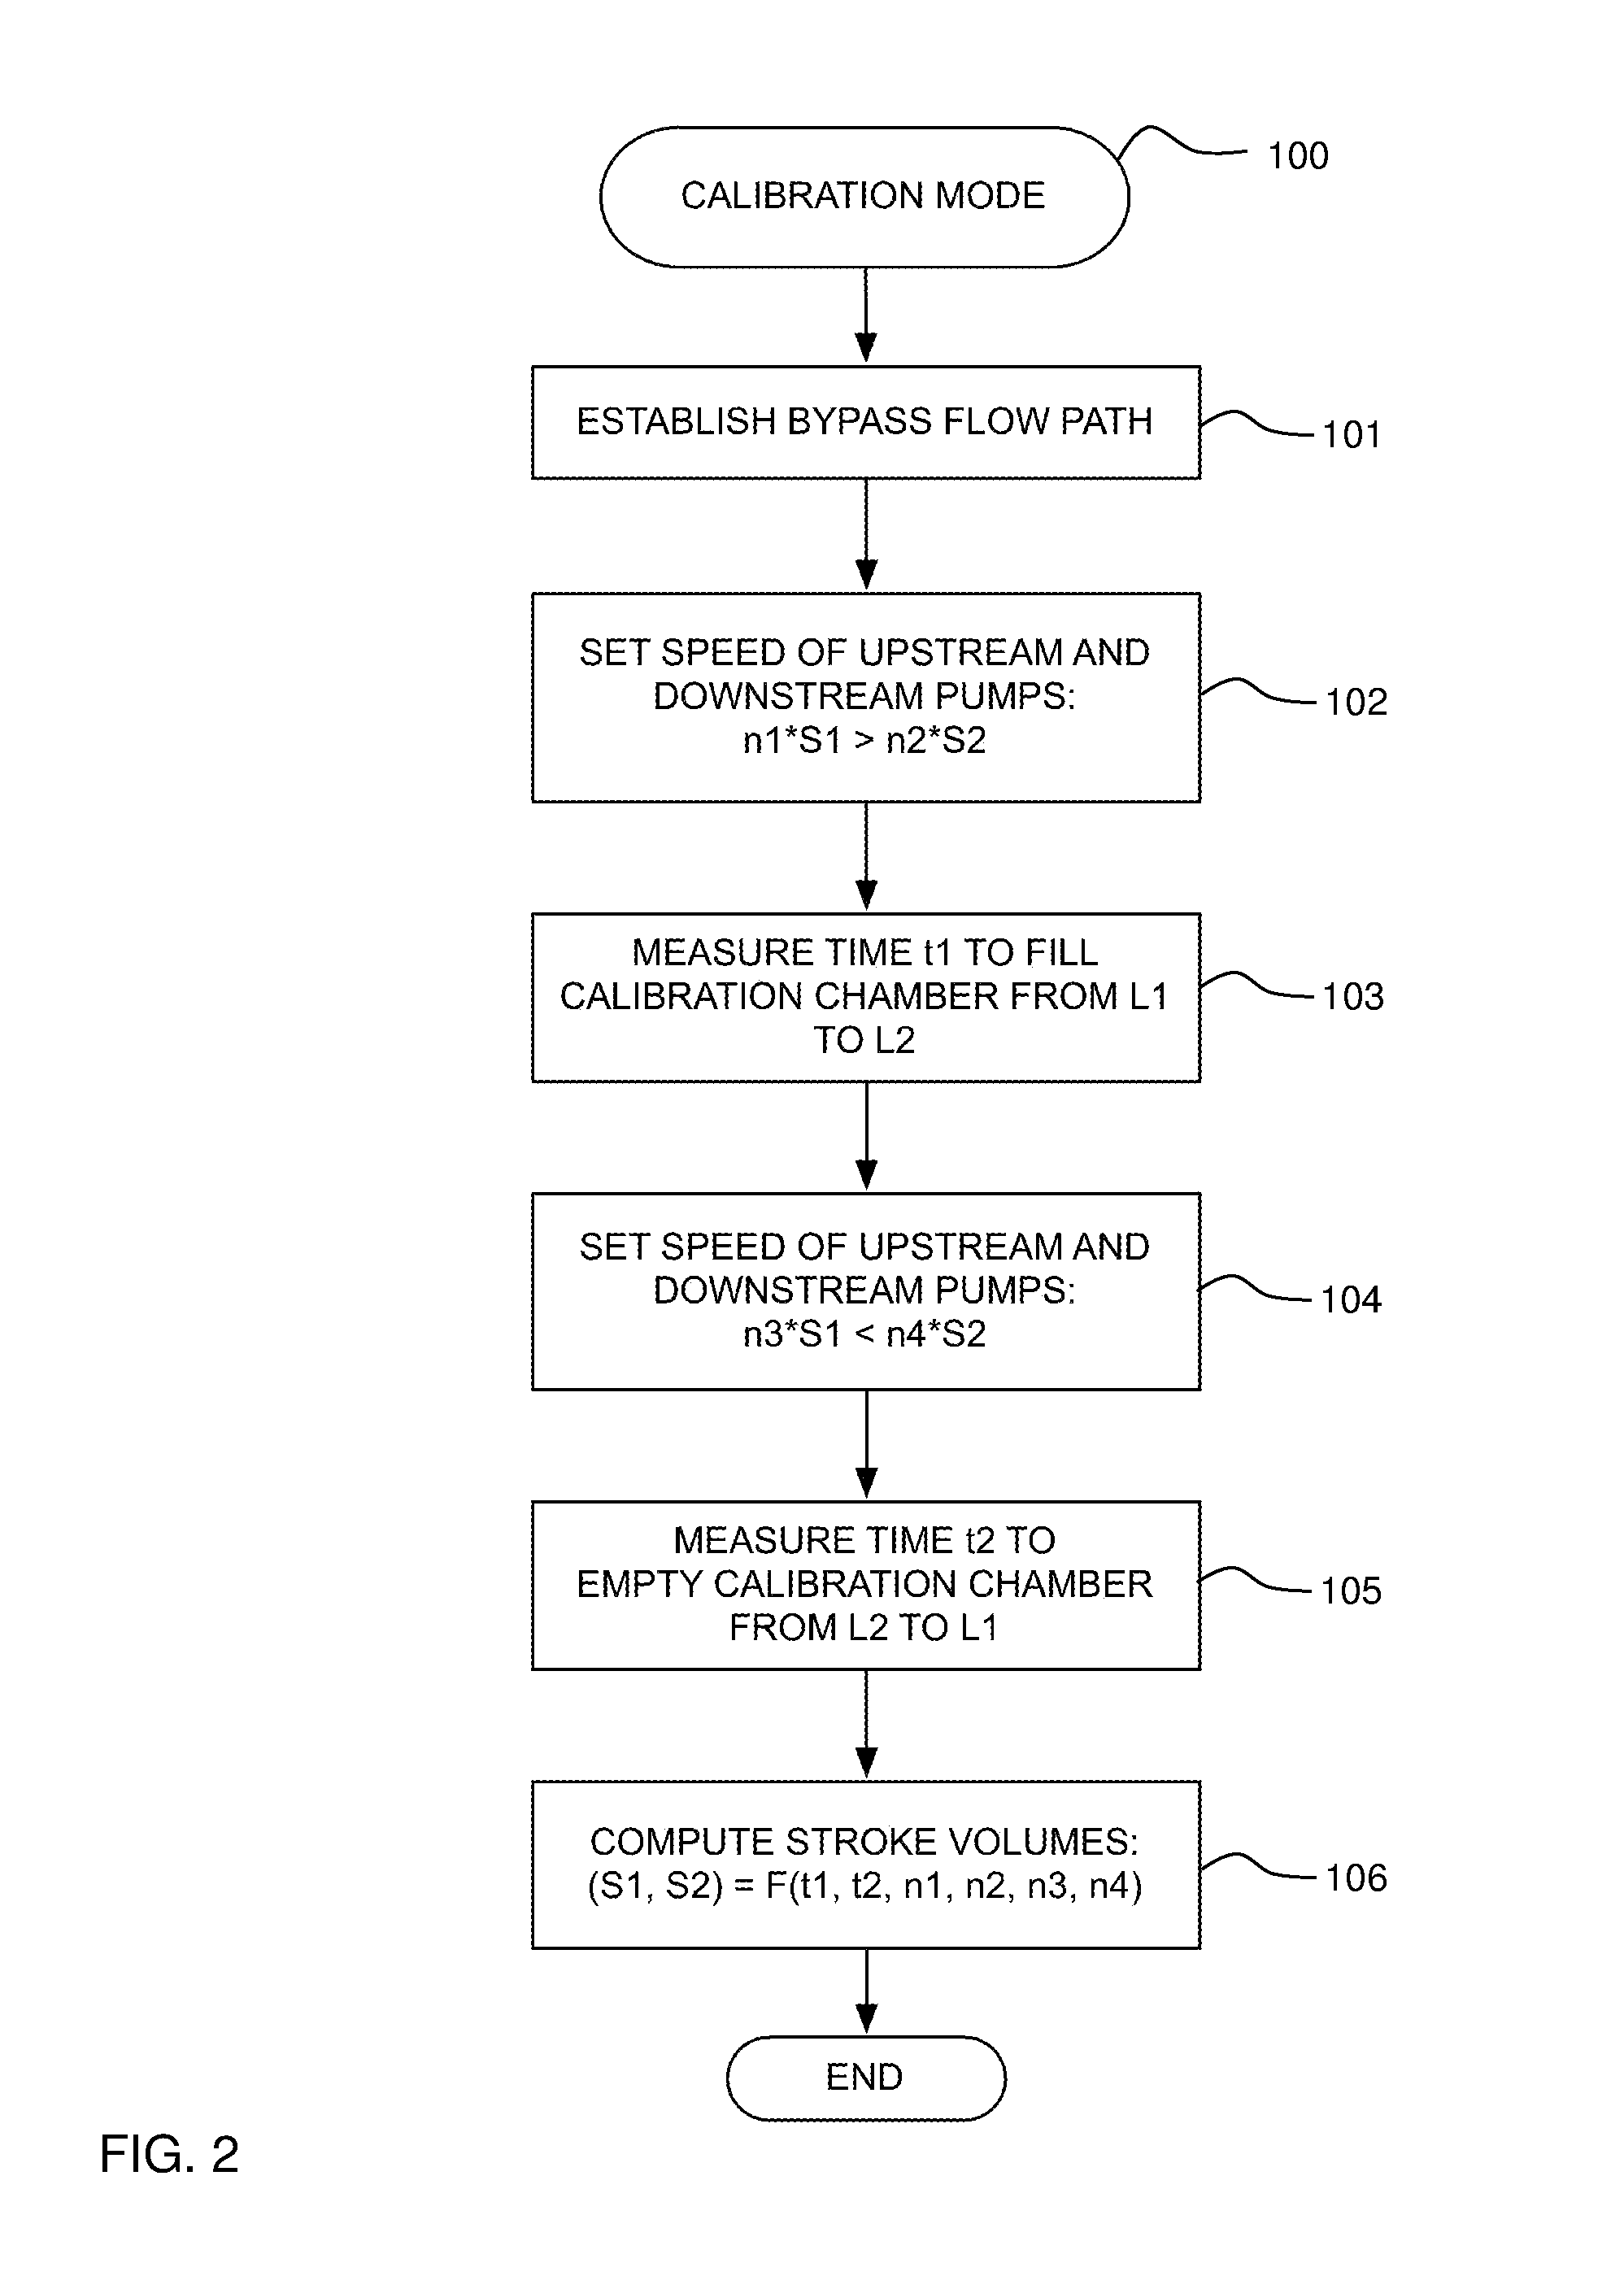 Individual pump calibration for ultrafiltration control in a dialysis apparatus